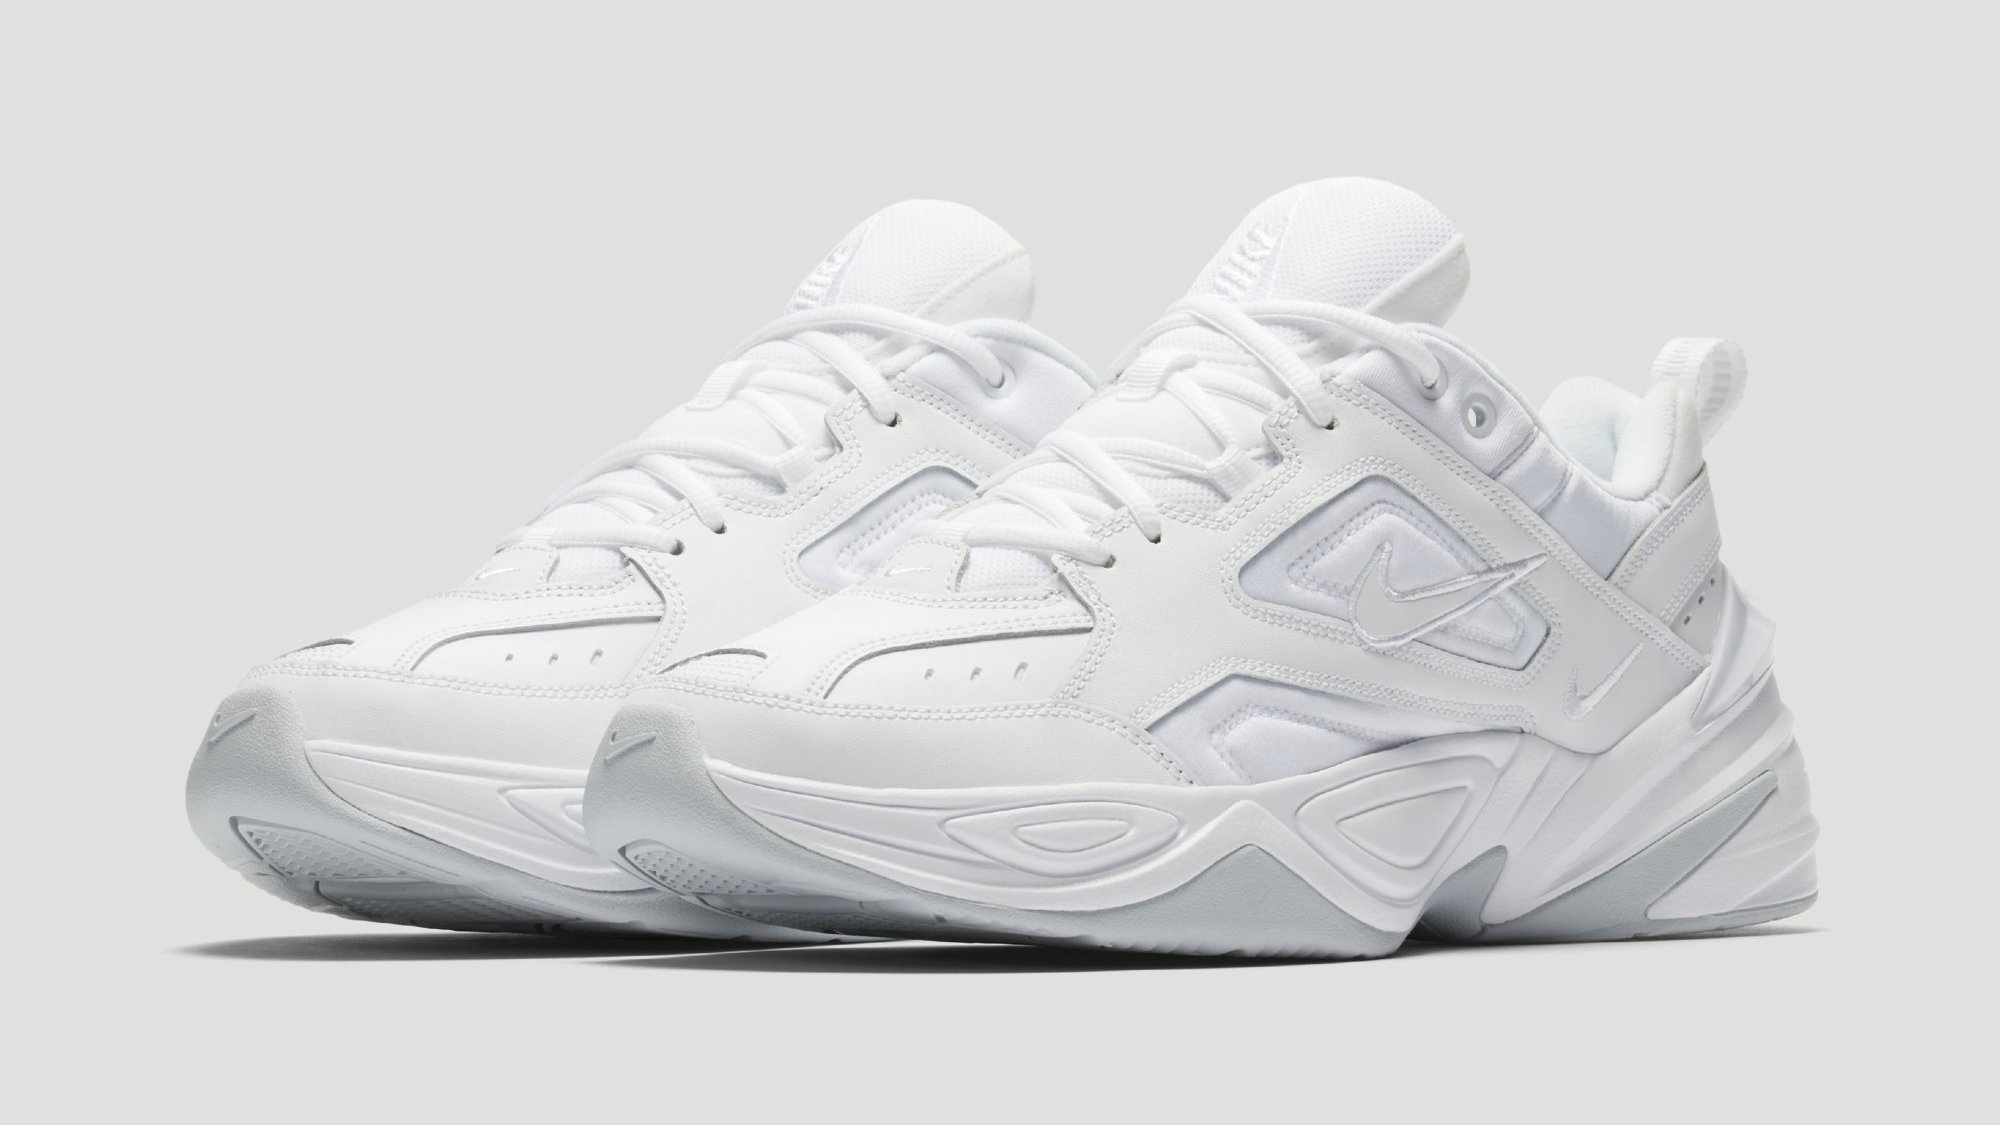 Is This the Most Dad-Friendly Pair of Nike M2K Teknos?